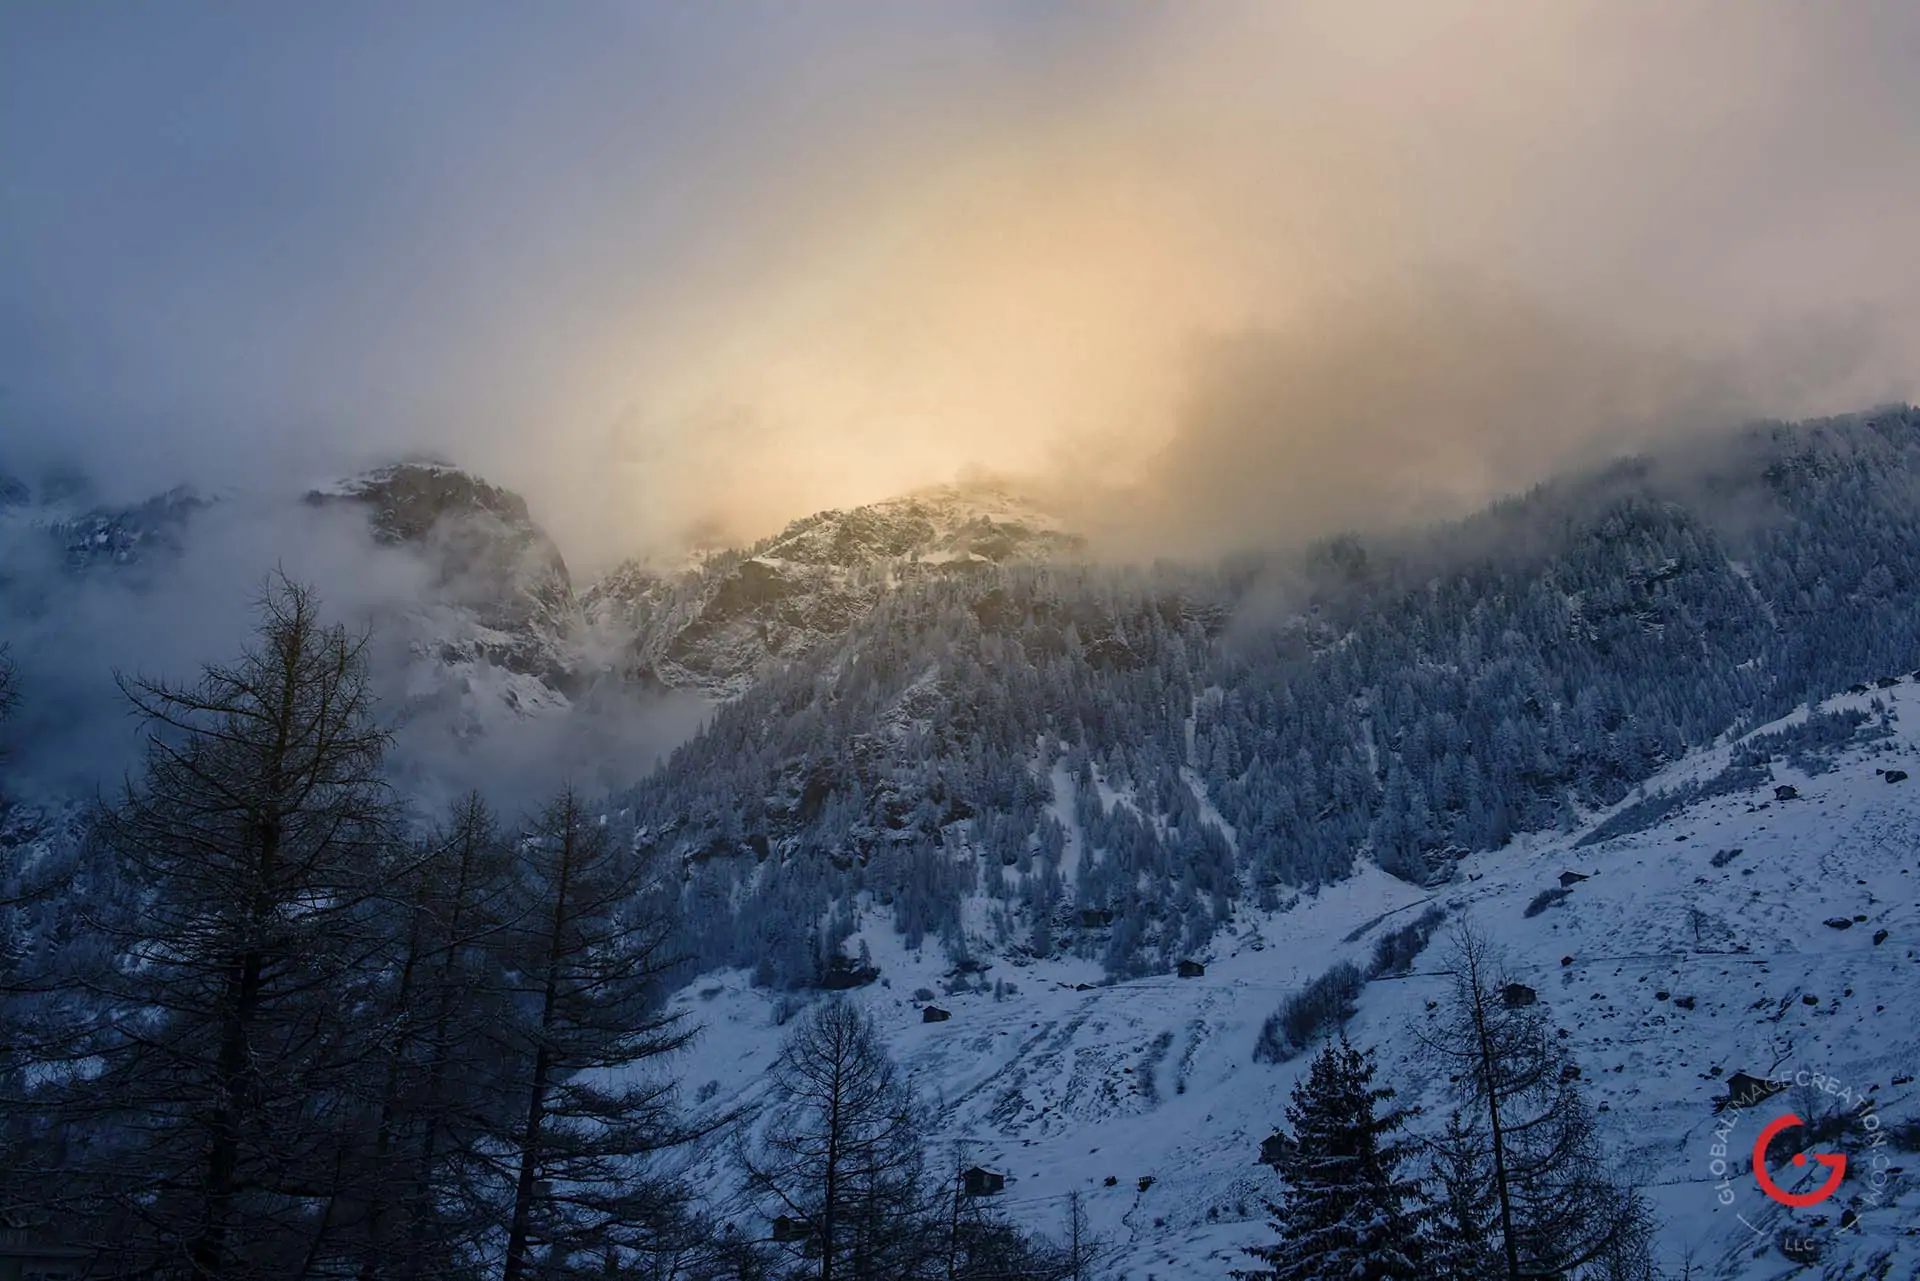 Snowy Mountain Sunrise in the Swiss Alps - Travel Photographer and Switzerland Photography